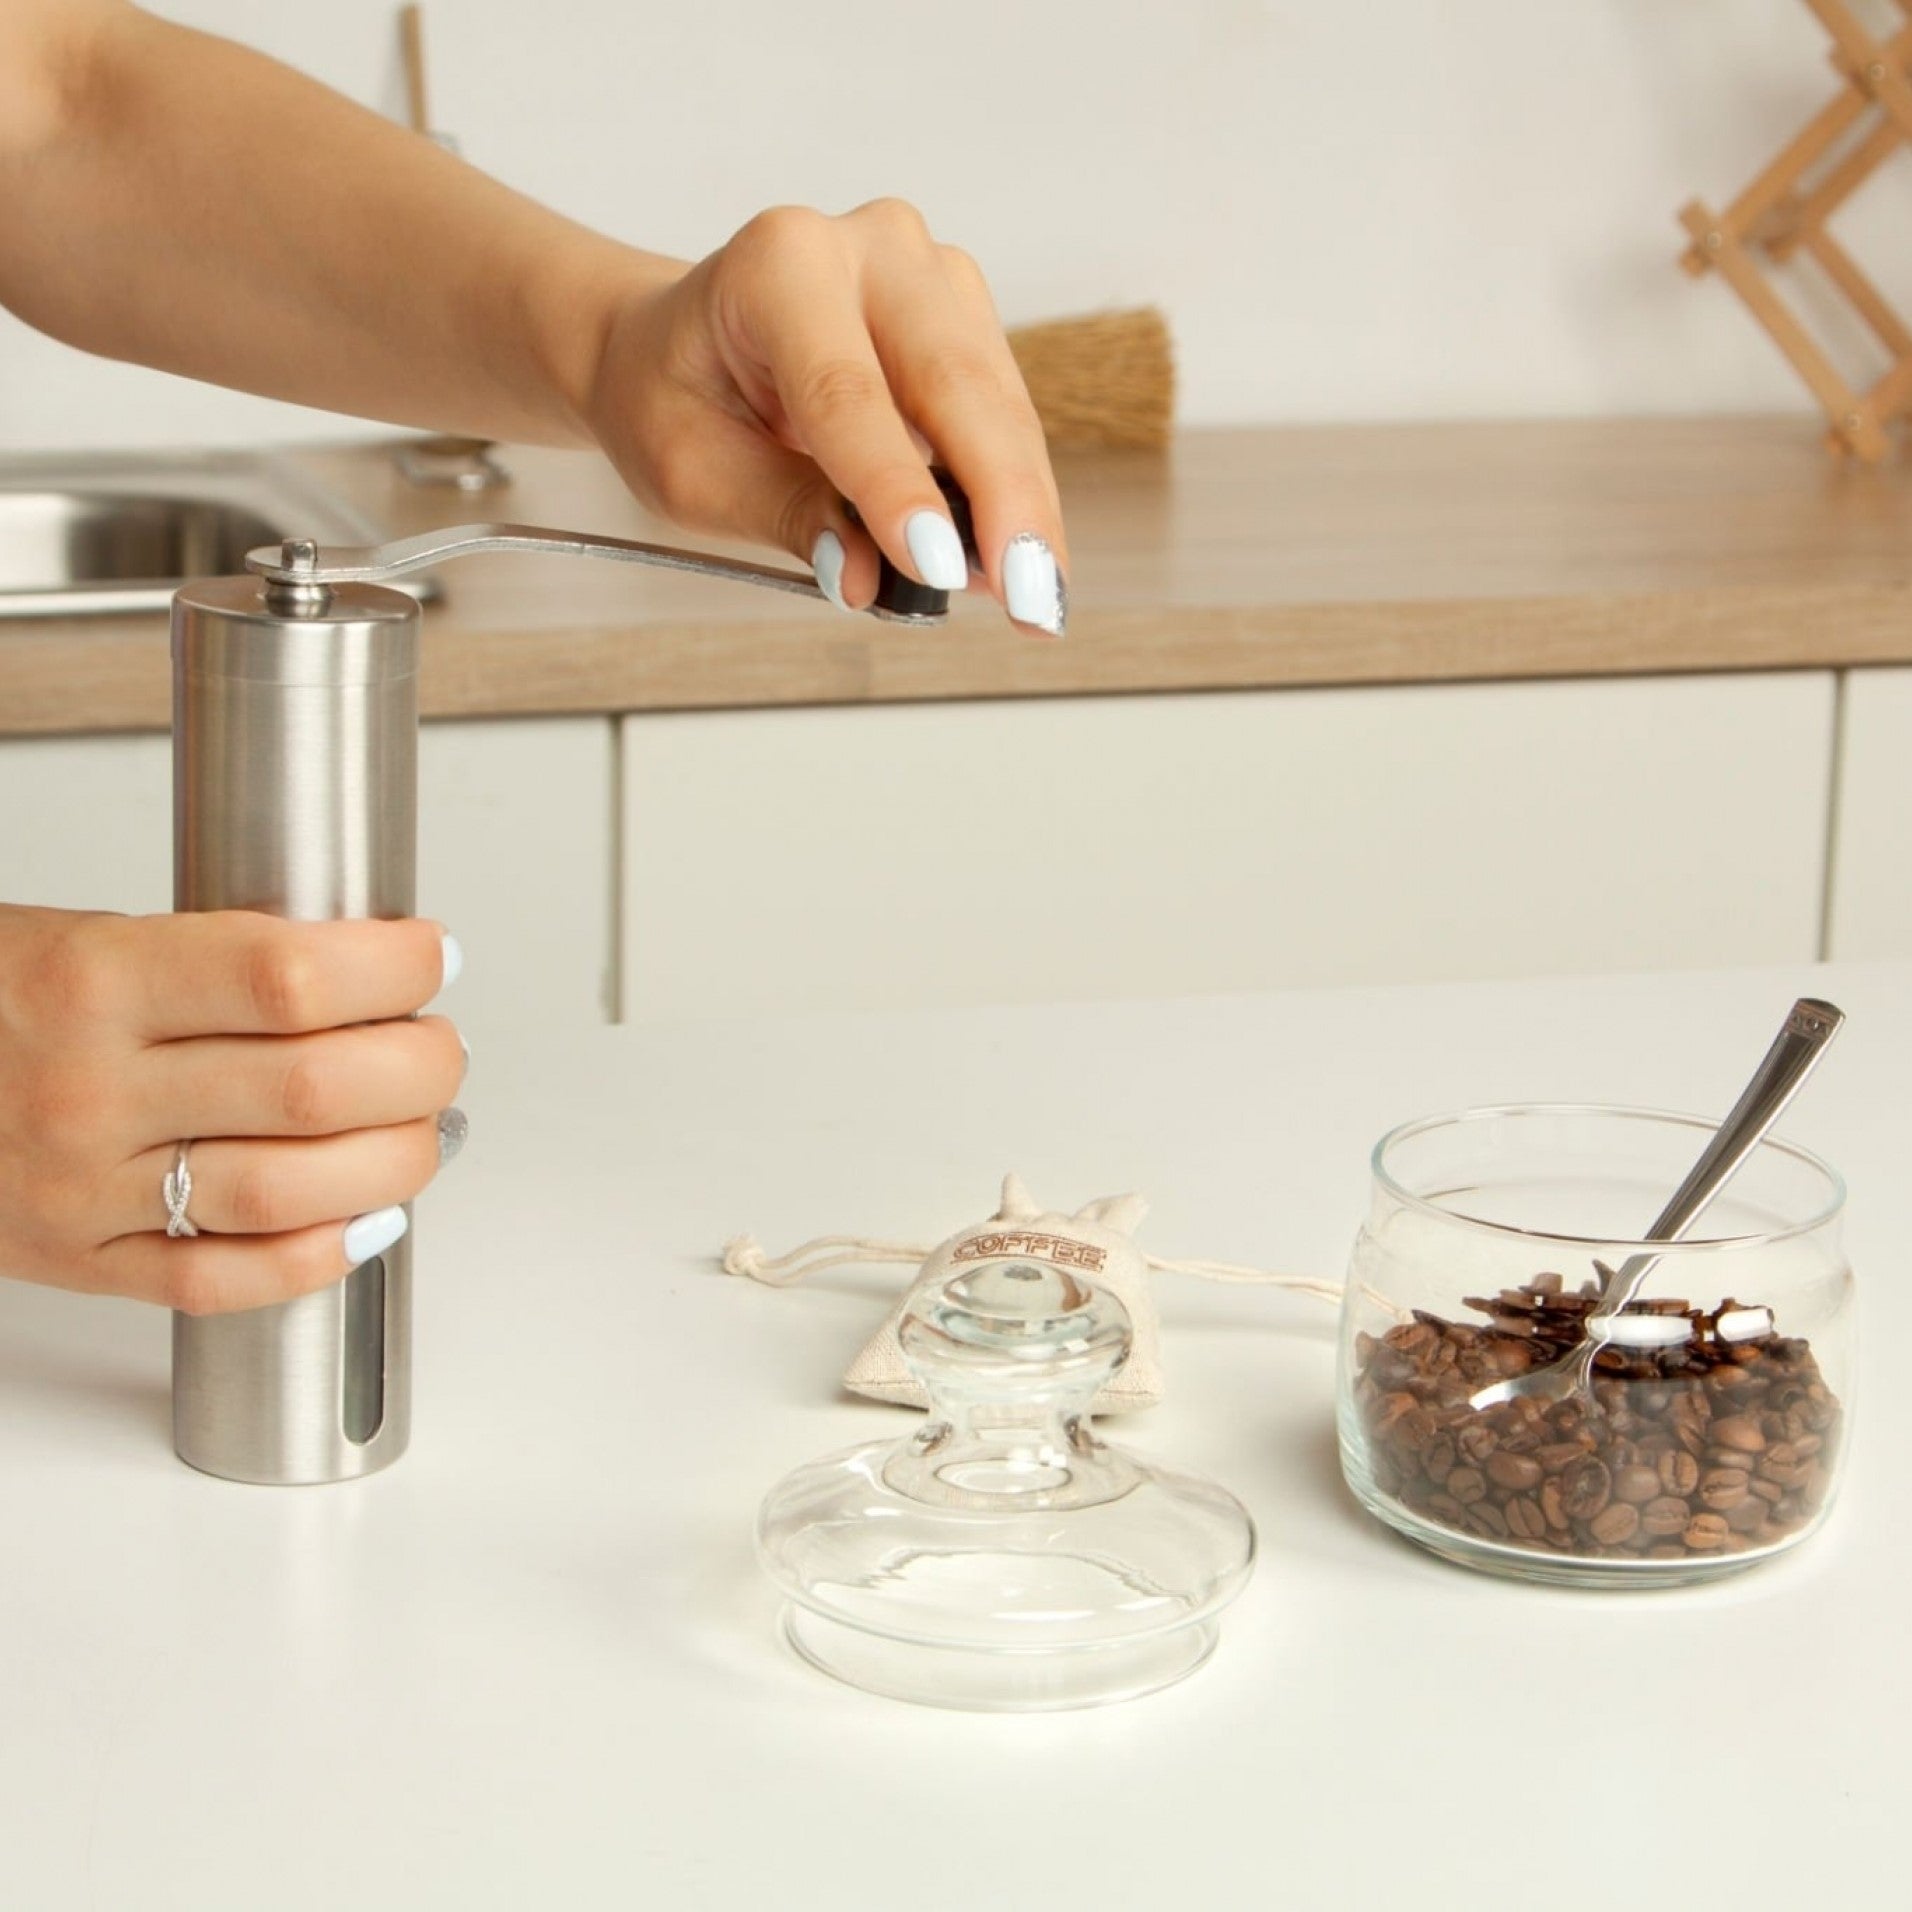 Mill Coffee Bean Grinder: Premium Stainless Steel Design with High-Quality Ceramic Blades